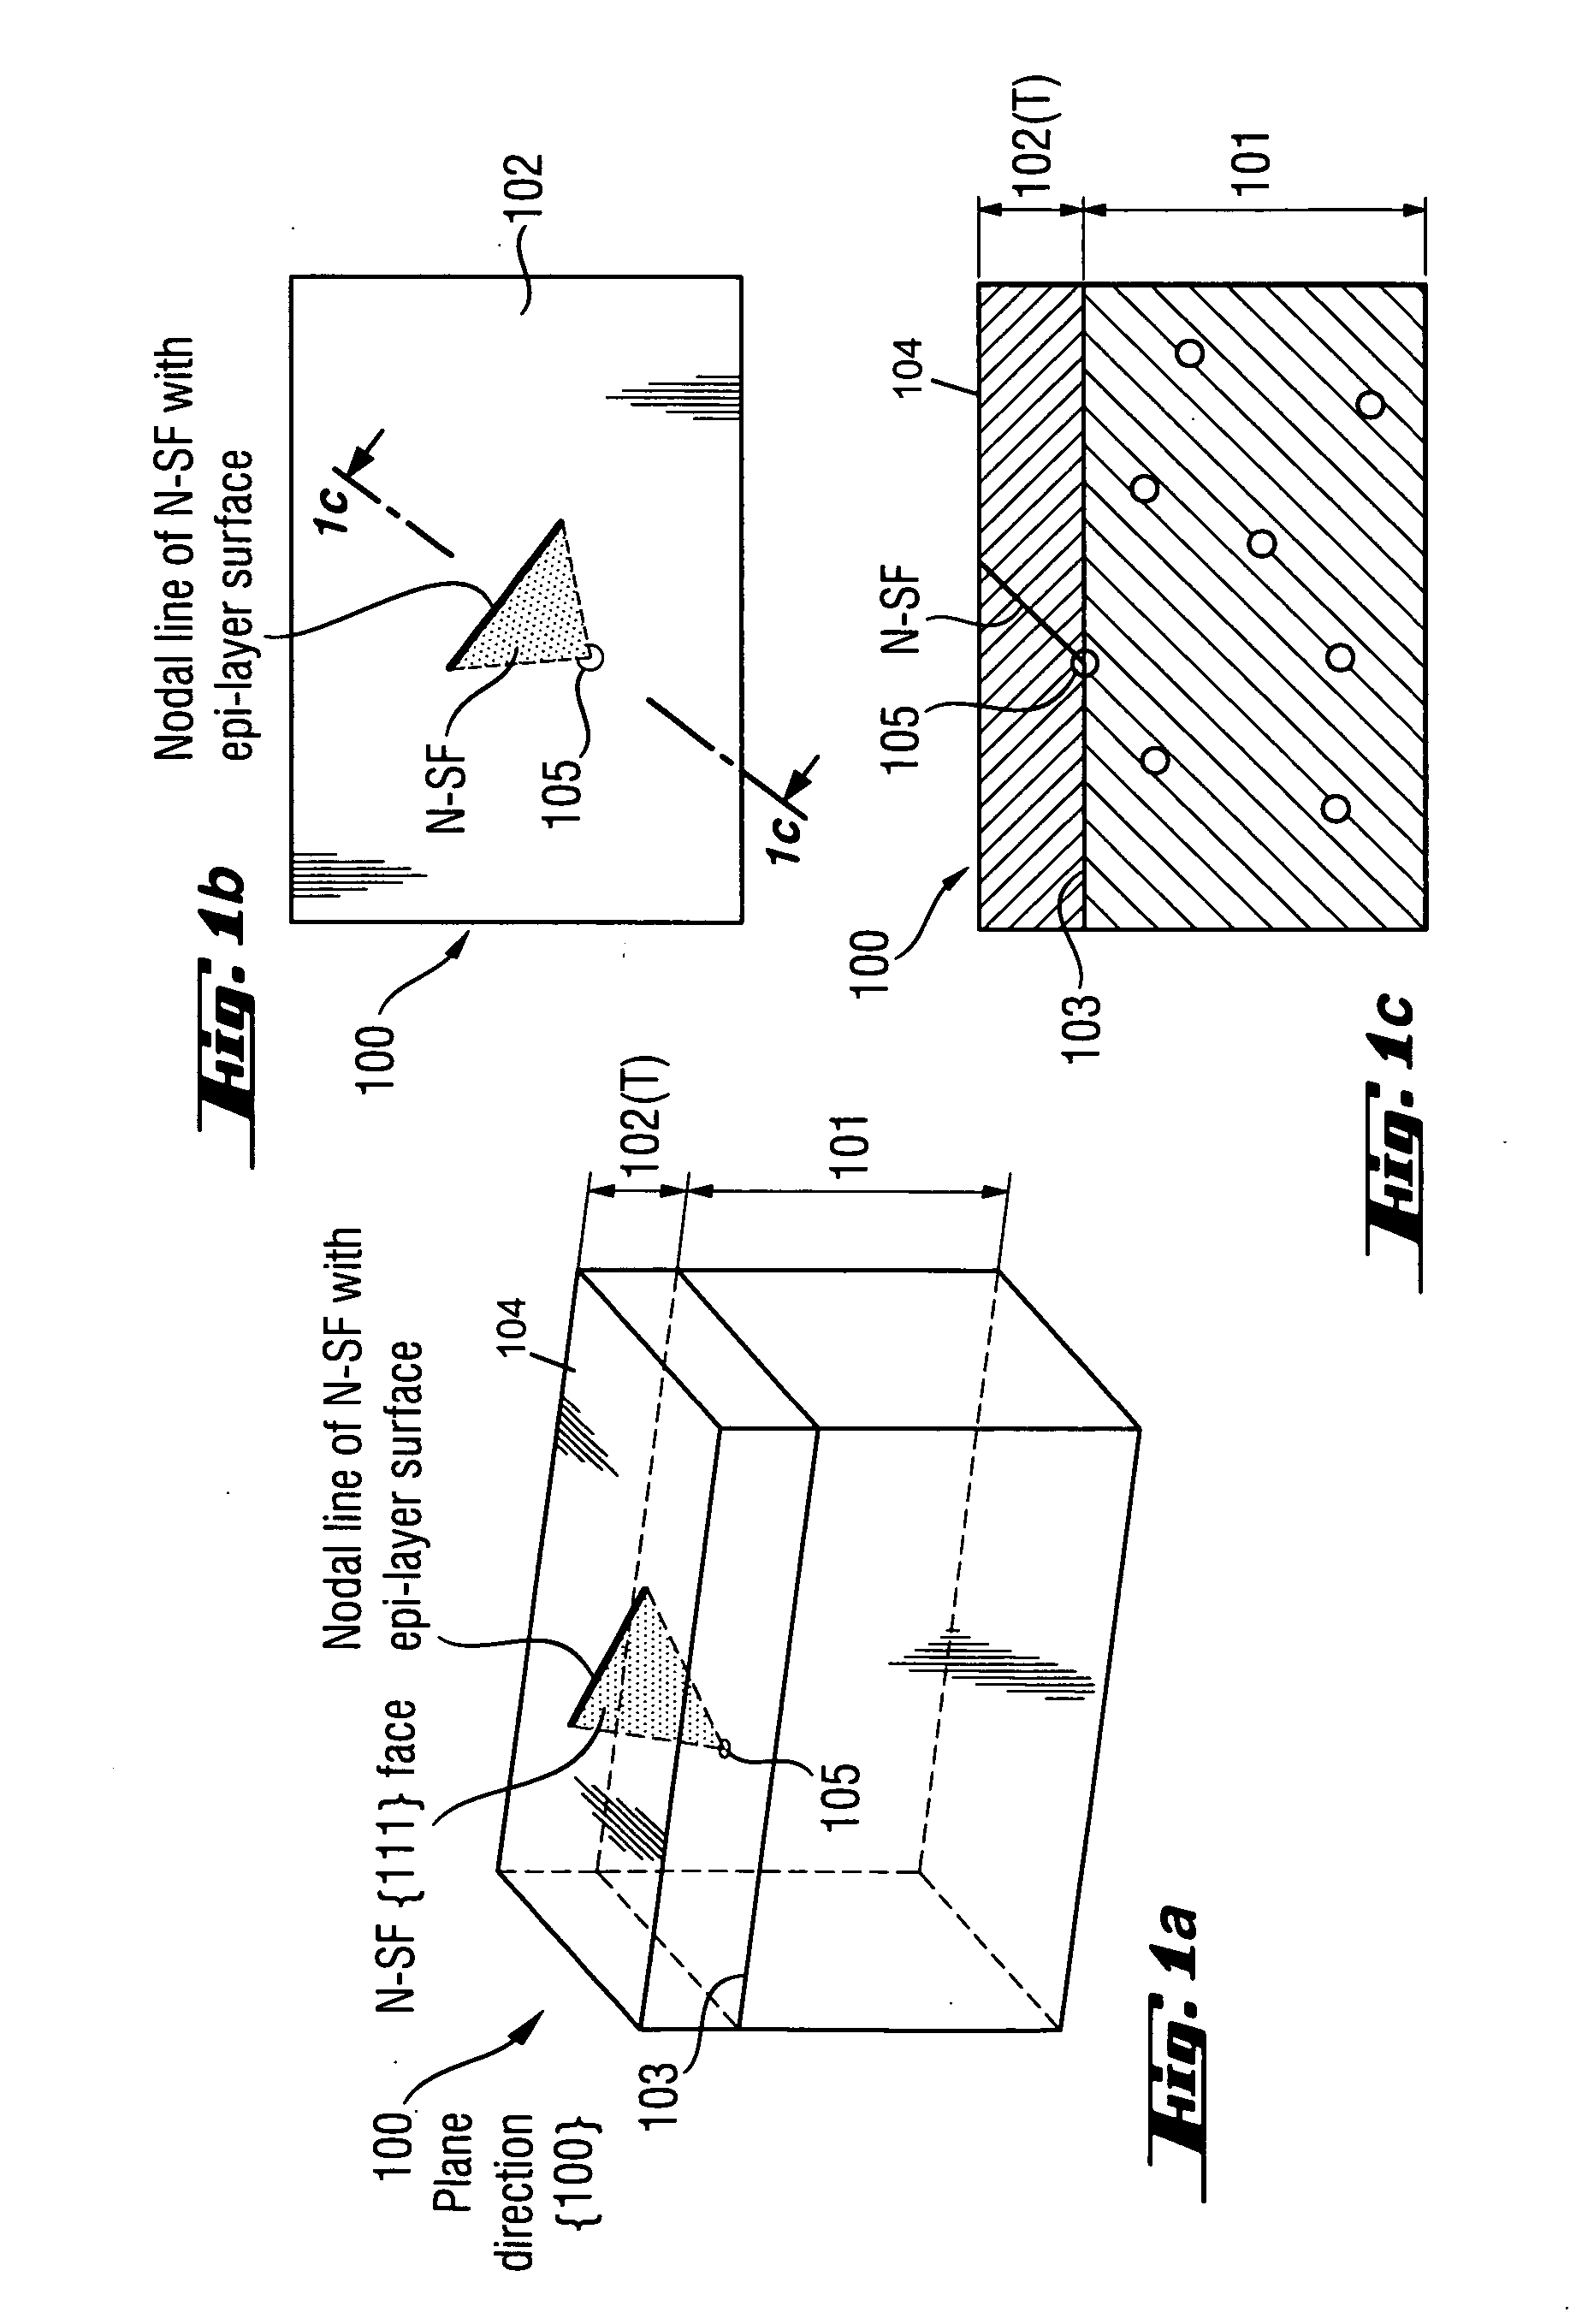 Epitaxial wafer and method for producing epitaxial wafers